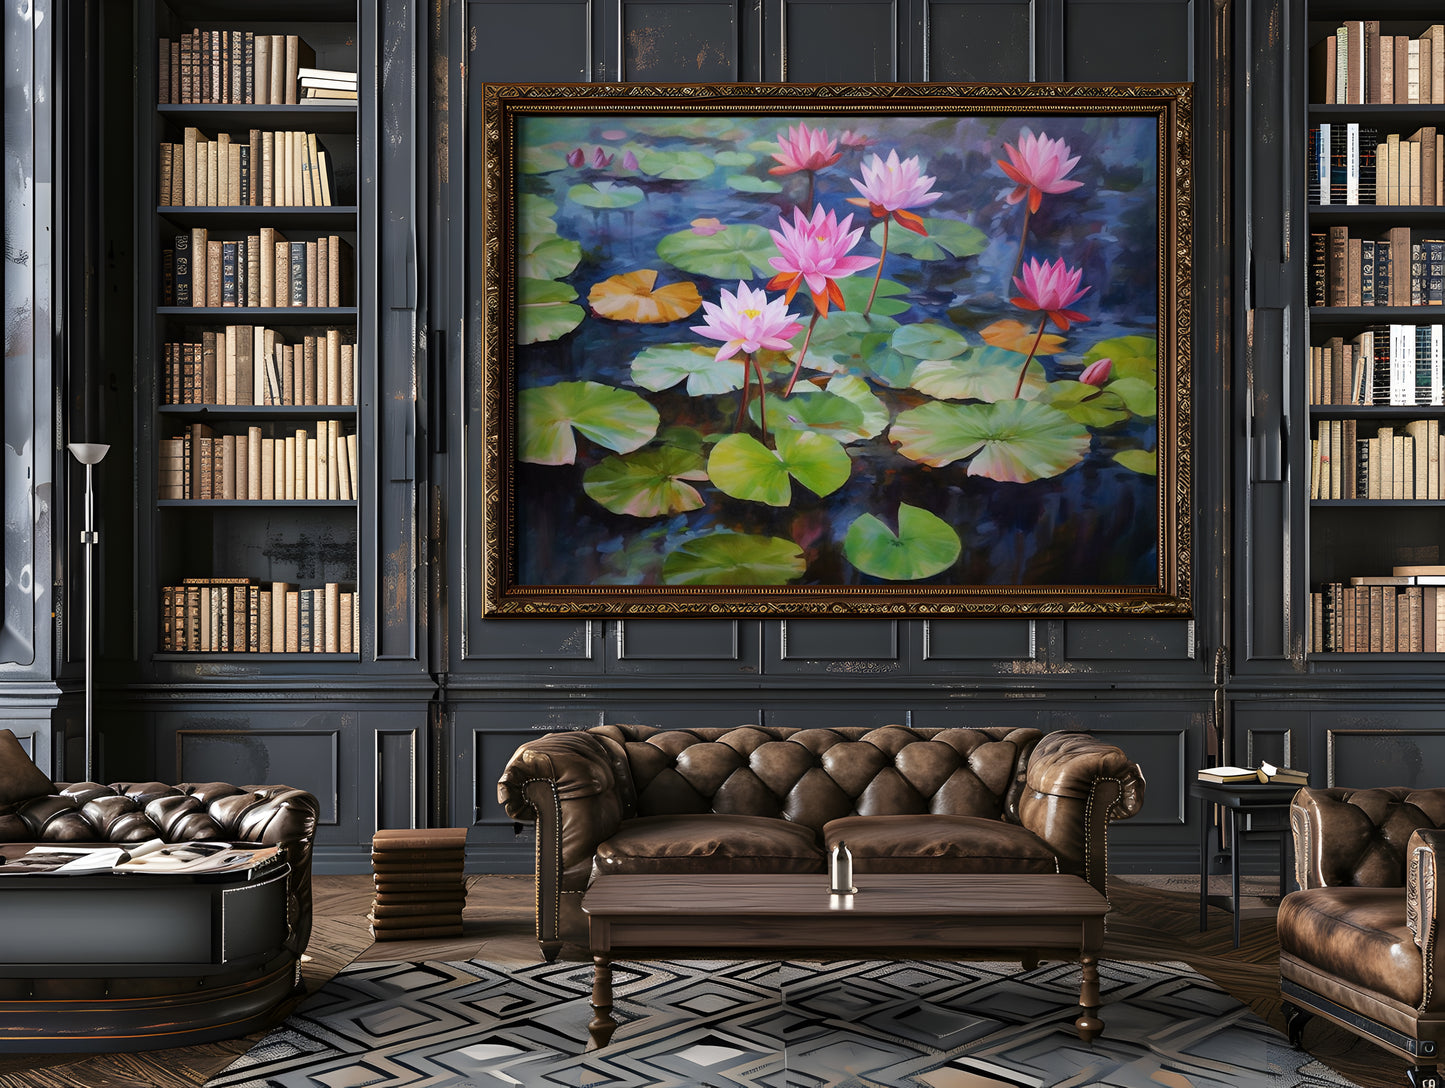 The Lotus Pond Exclusive Painting